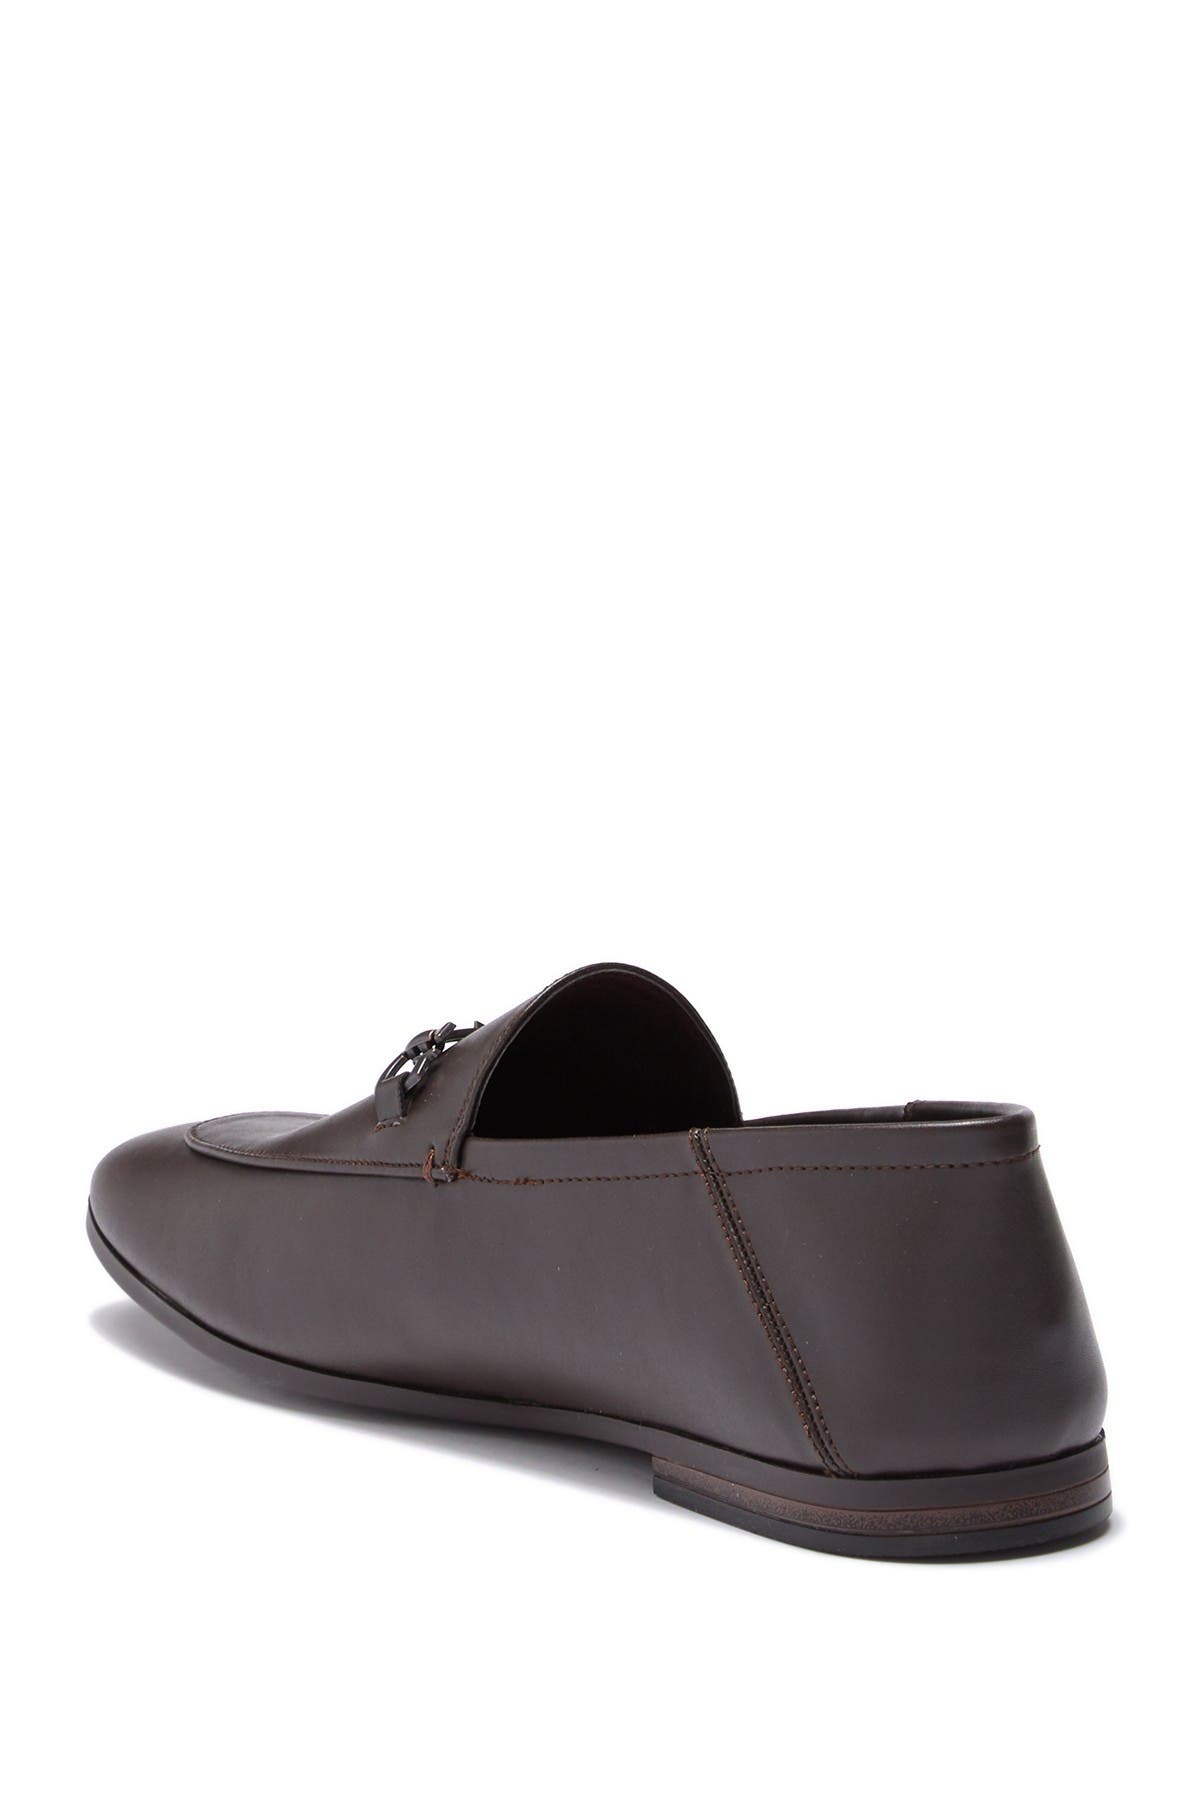 guess edwin loafer